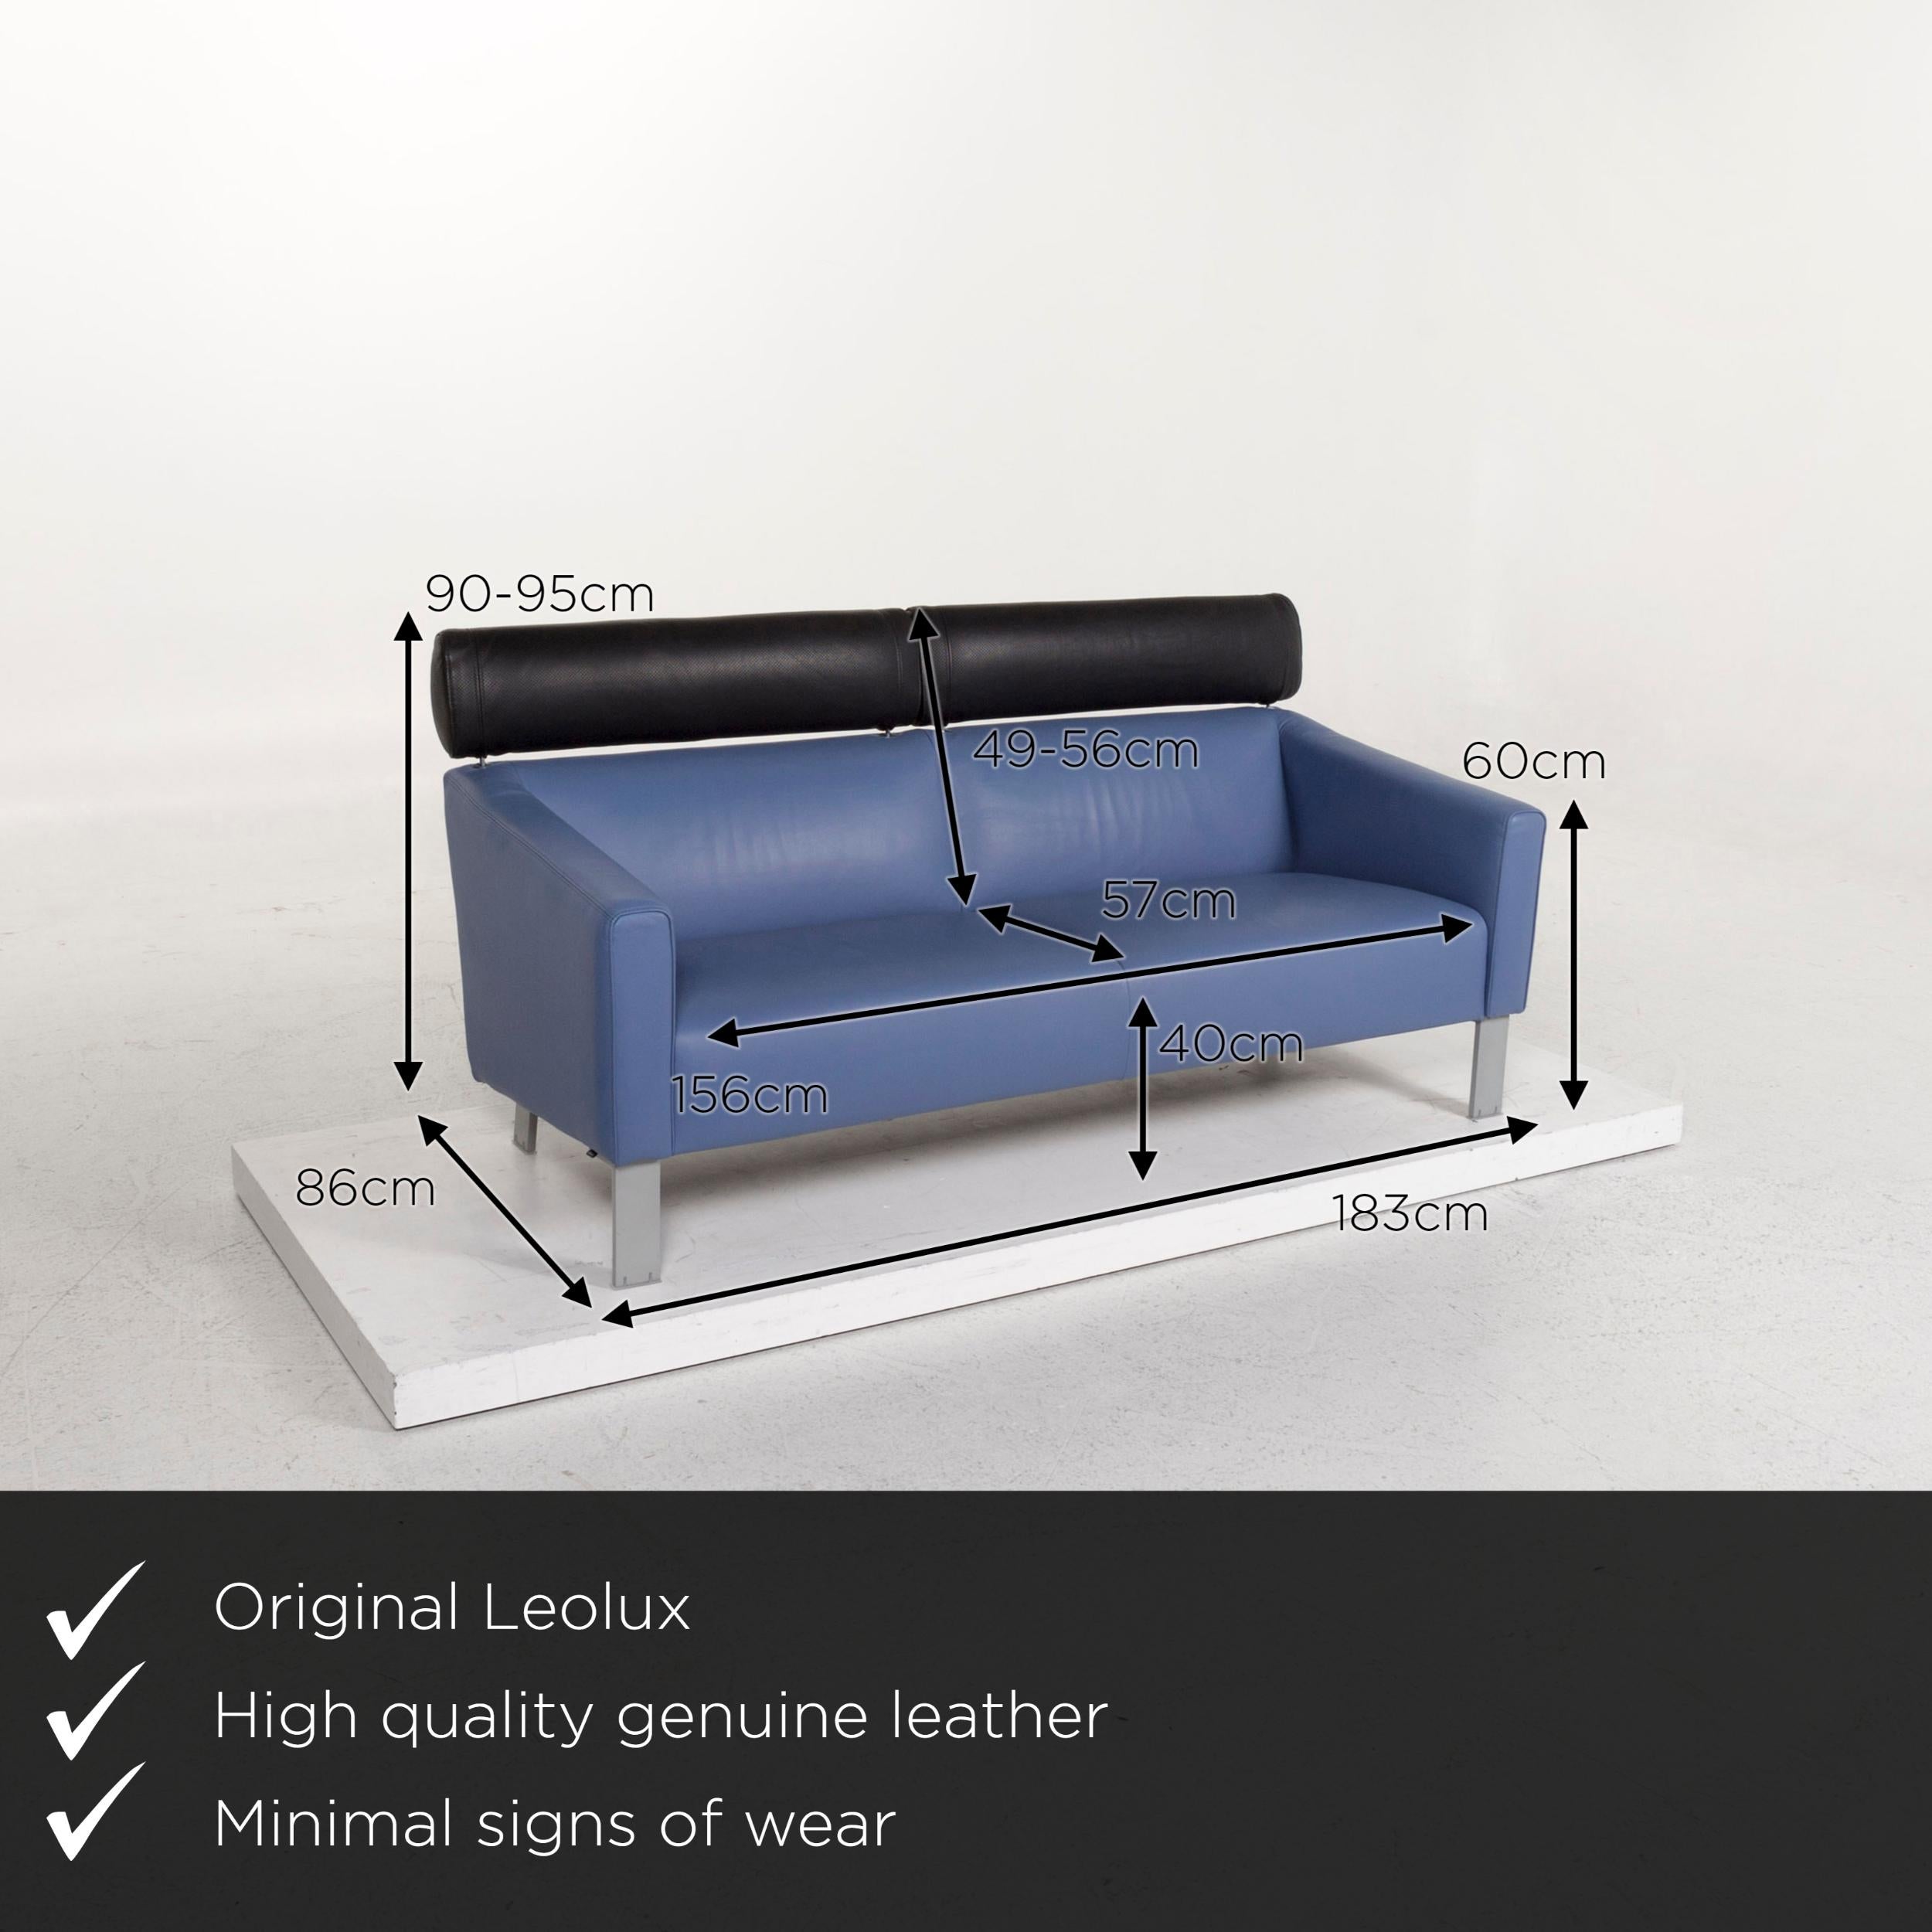 We present to you a Leolux leather sofa blue two-seat function couch.

 

 Product measurements in centimeters:
 

Depth 86
Width 183
Height 90
Seat height 40
Rest height 60
Seat depth 57
Seat width 156
Back height 49.